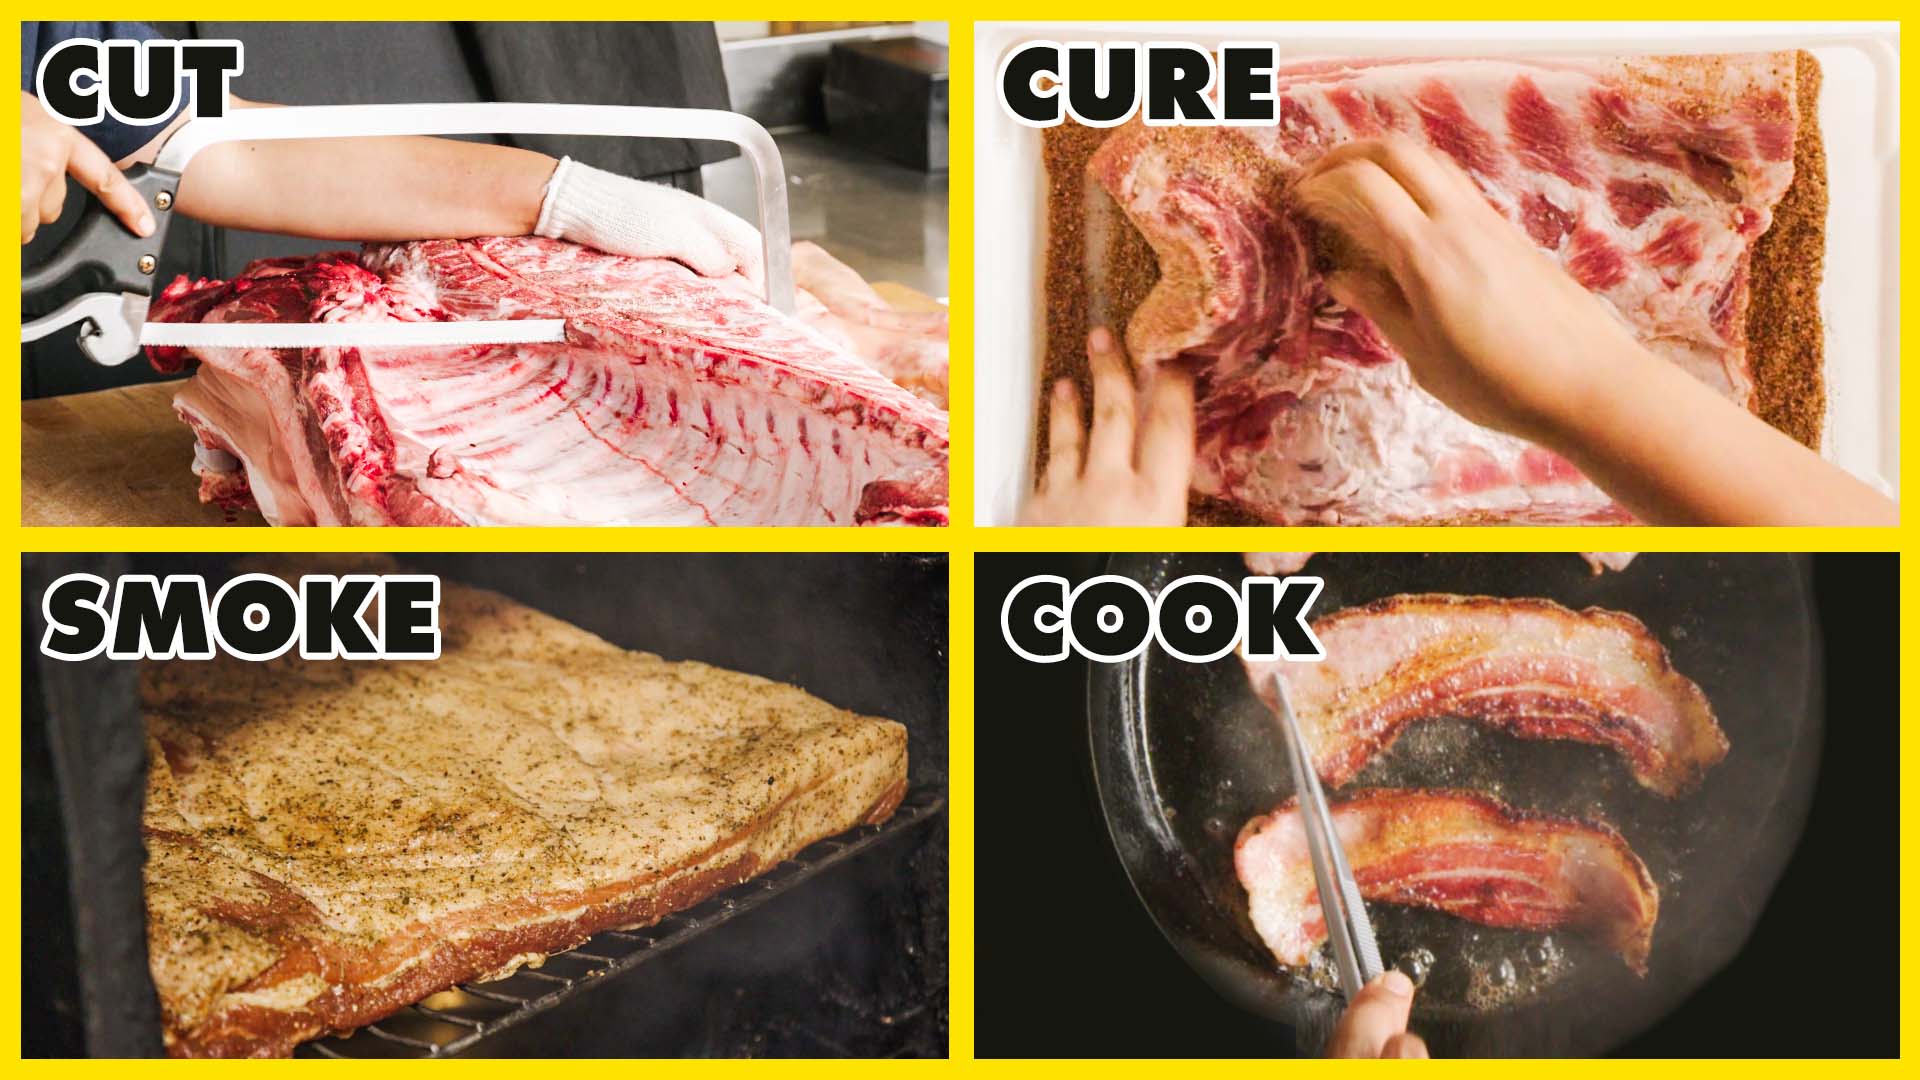 Watch How Pro Butchers Make Bacon, Prime Cuts